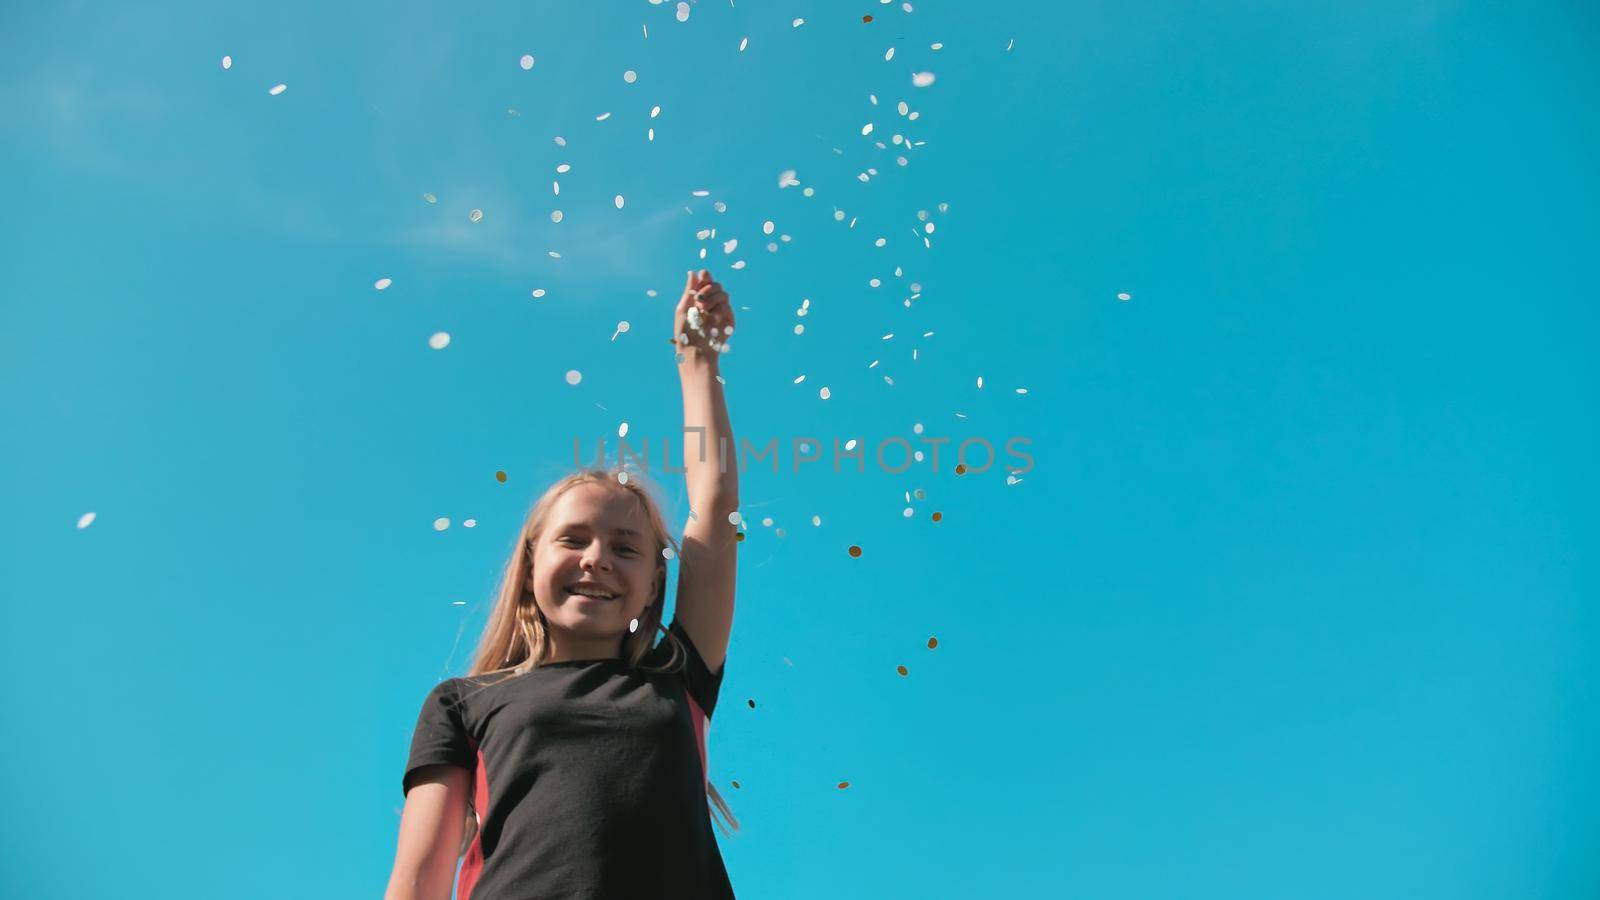 Teen girl scatters a multi-colored confetti on a background of blue sky. by DovidPro